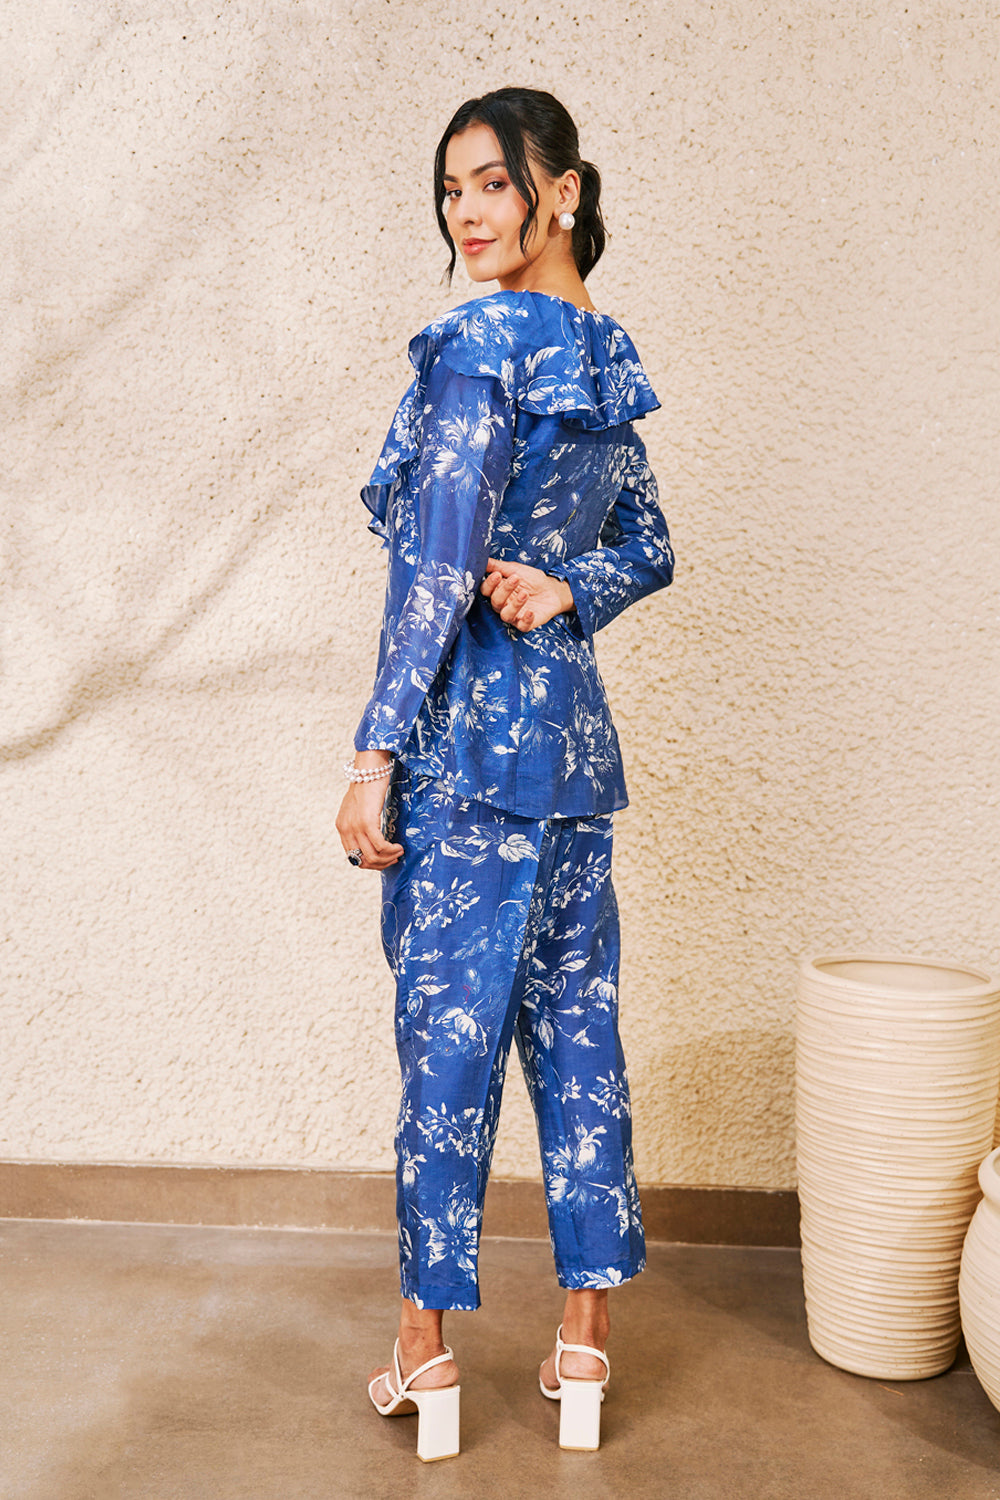 Blue And White Floral Printed Peplum And Pants Set